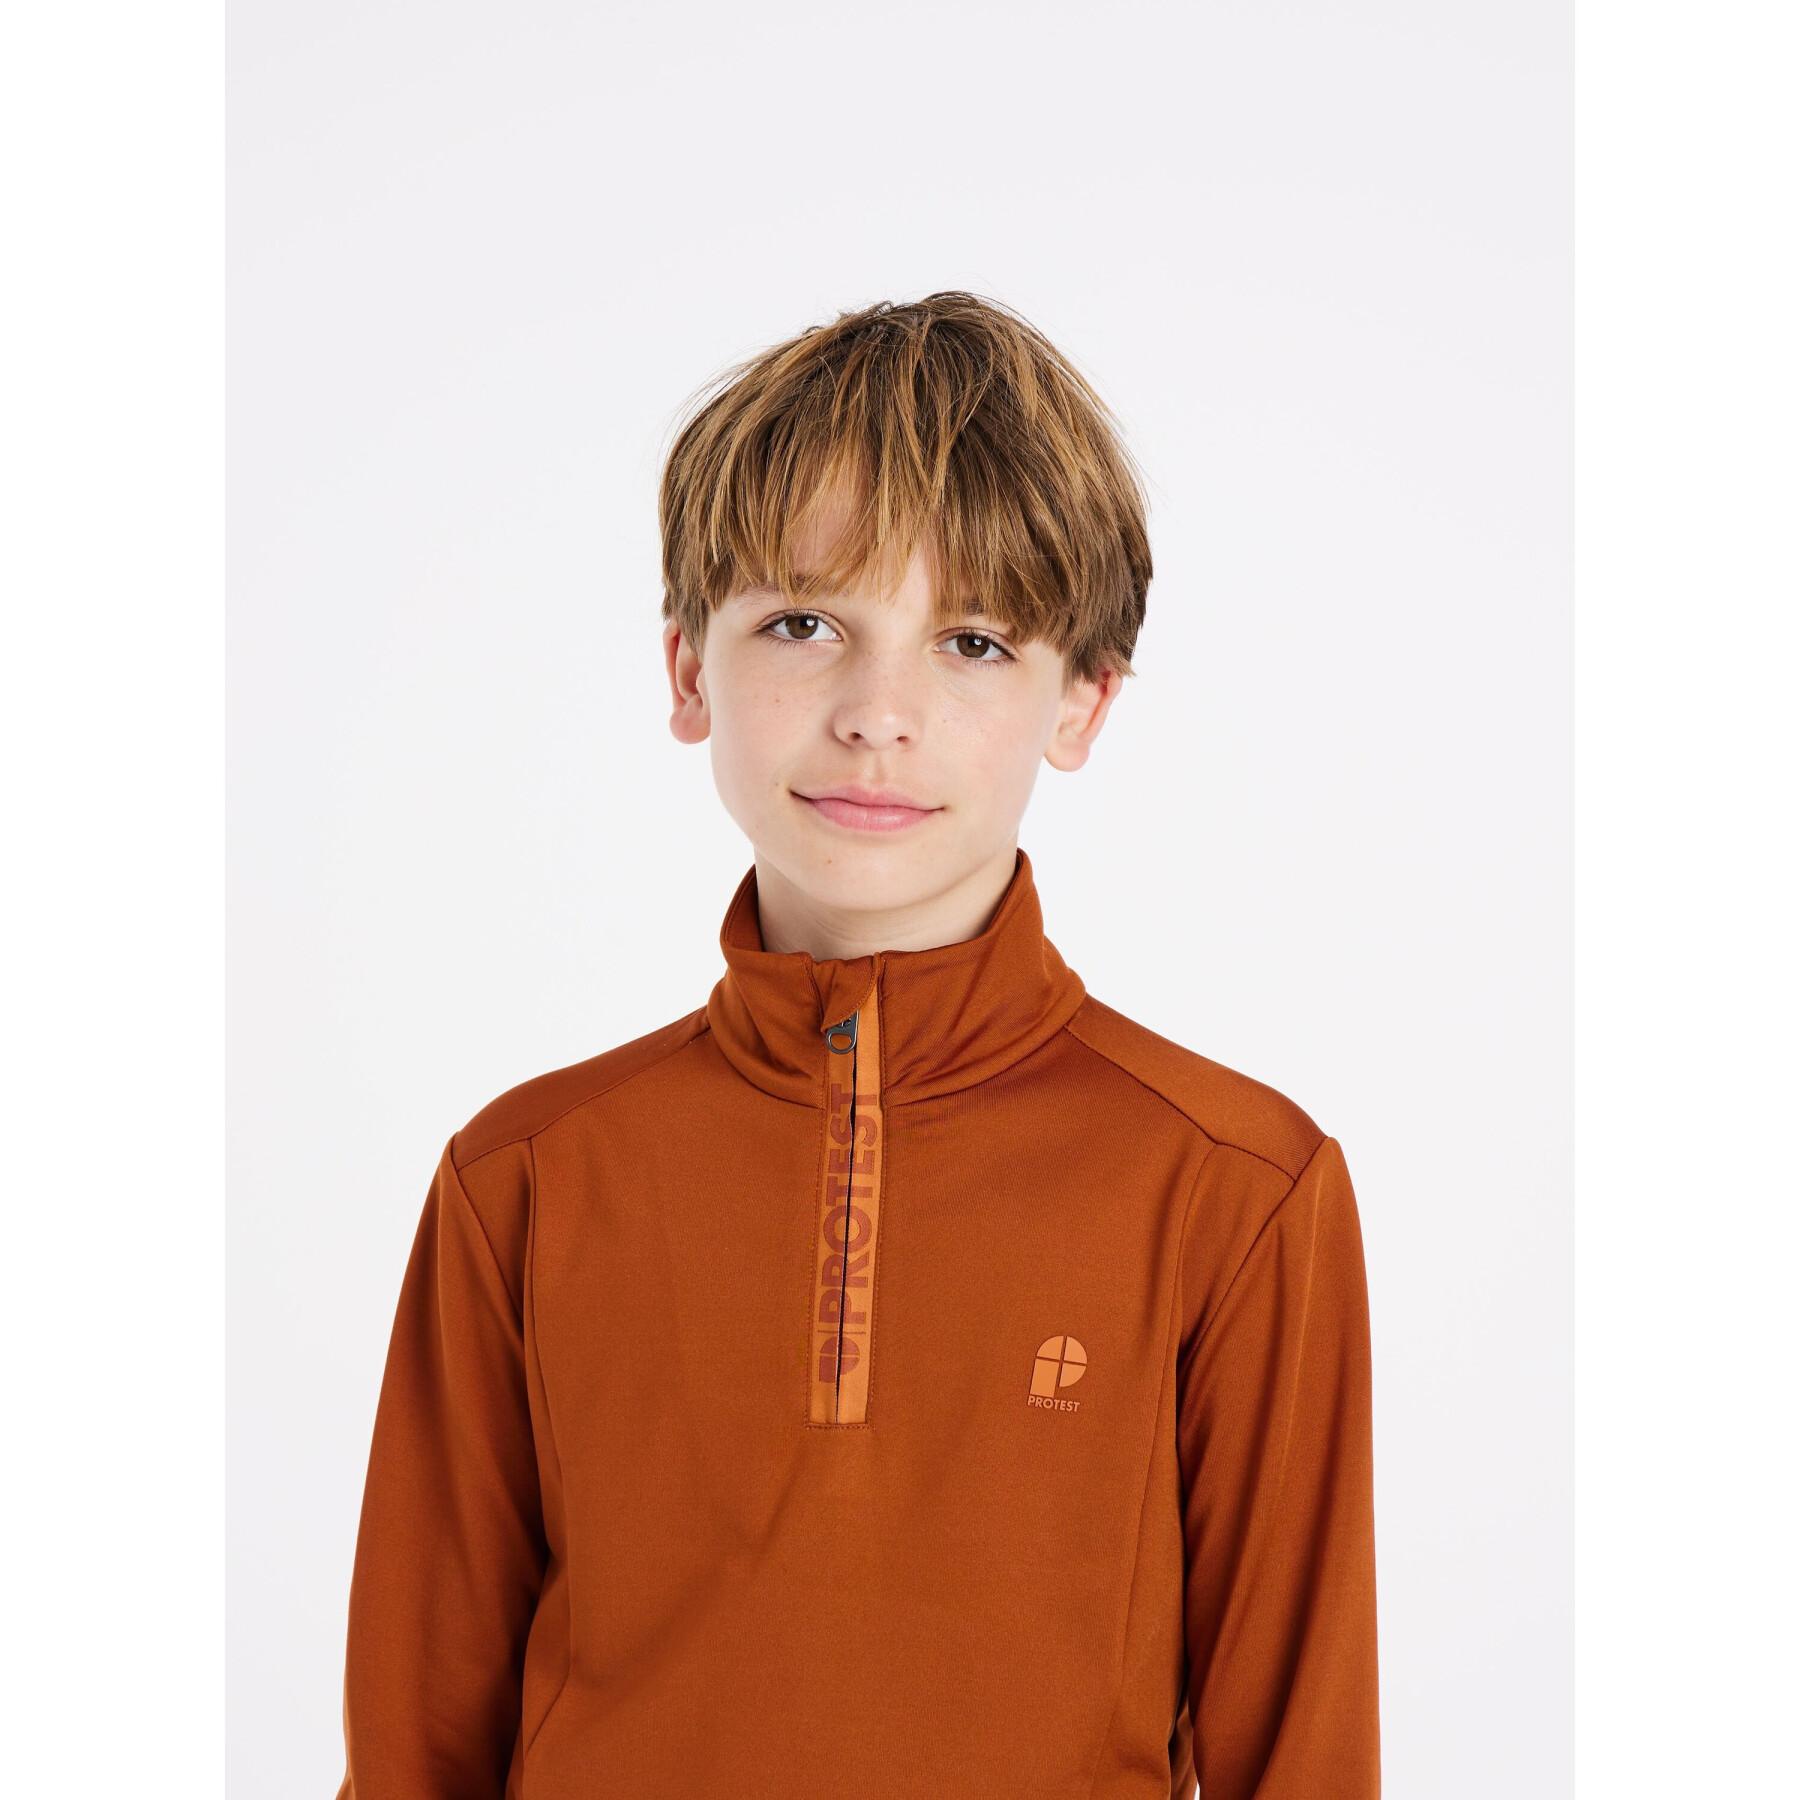 Sous-pull 1/4 zip enfant Protest Willowy